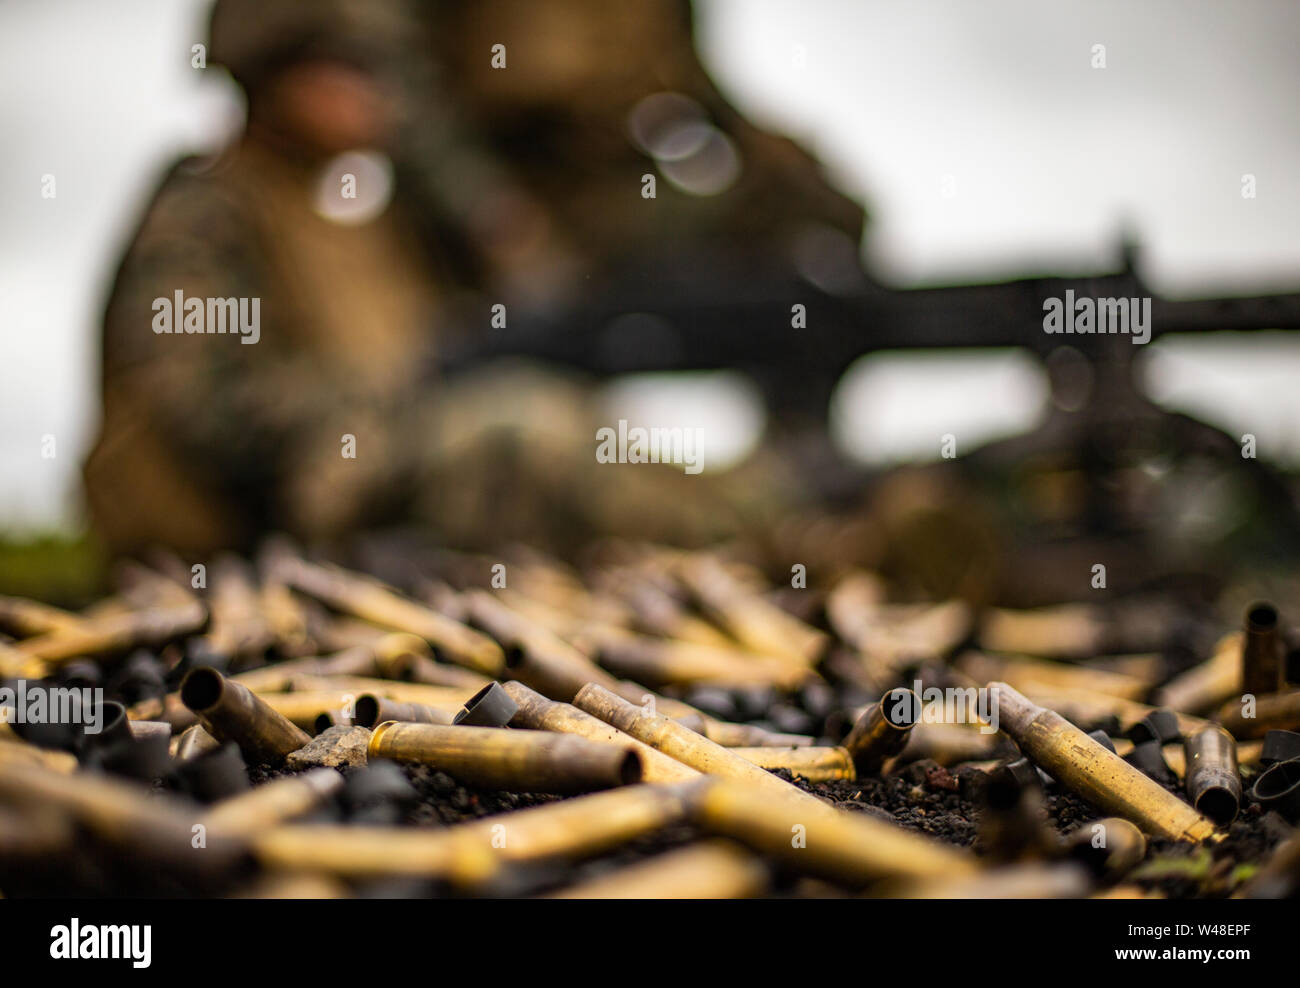 A pile of expended brass and clips lies on the ground around an M2A1 .50-caliber machine gun during exercise Eagle Wrath 19 at Combined Arms Training Center (CATC) Camp Fuji, Japan, July 12, 2019. Eagle Wrath is an annual MWSS-171 exercise at Combined Arms Training Center Camp Fuji, Japan, designed to increase squadron proficiency in a forward operating environment and practice for real-world contingency missions. (U.S. Marine Corps photo by Cpl. Seth Rosenberg) Stock Photo